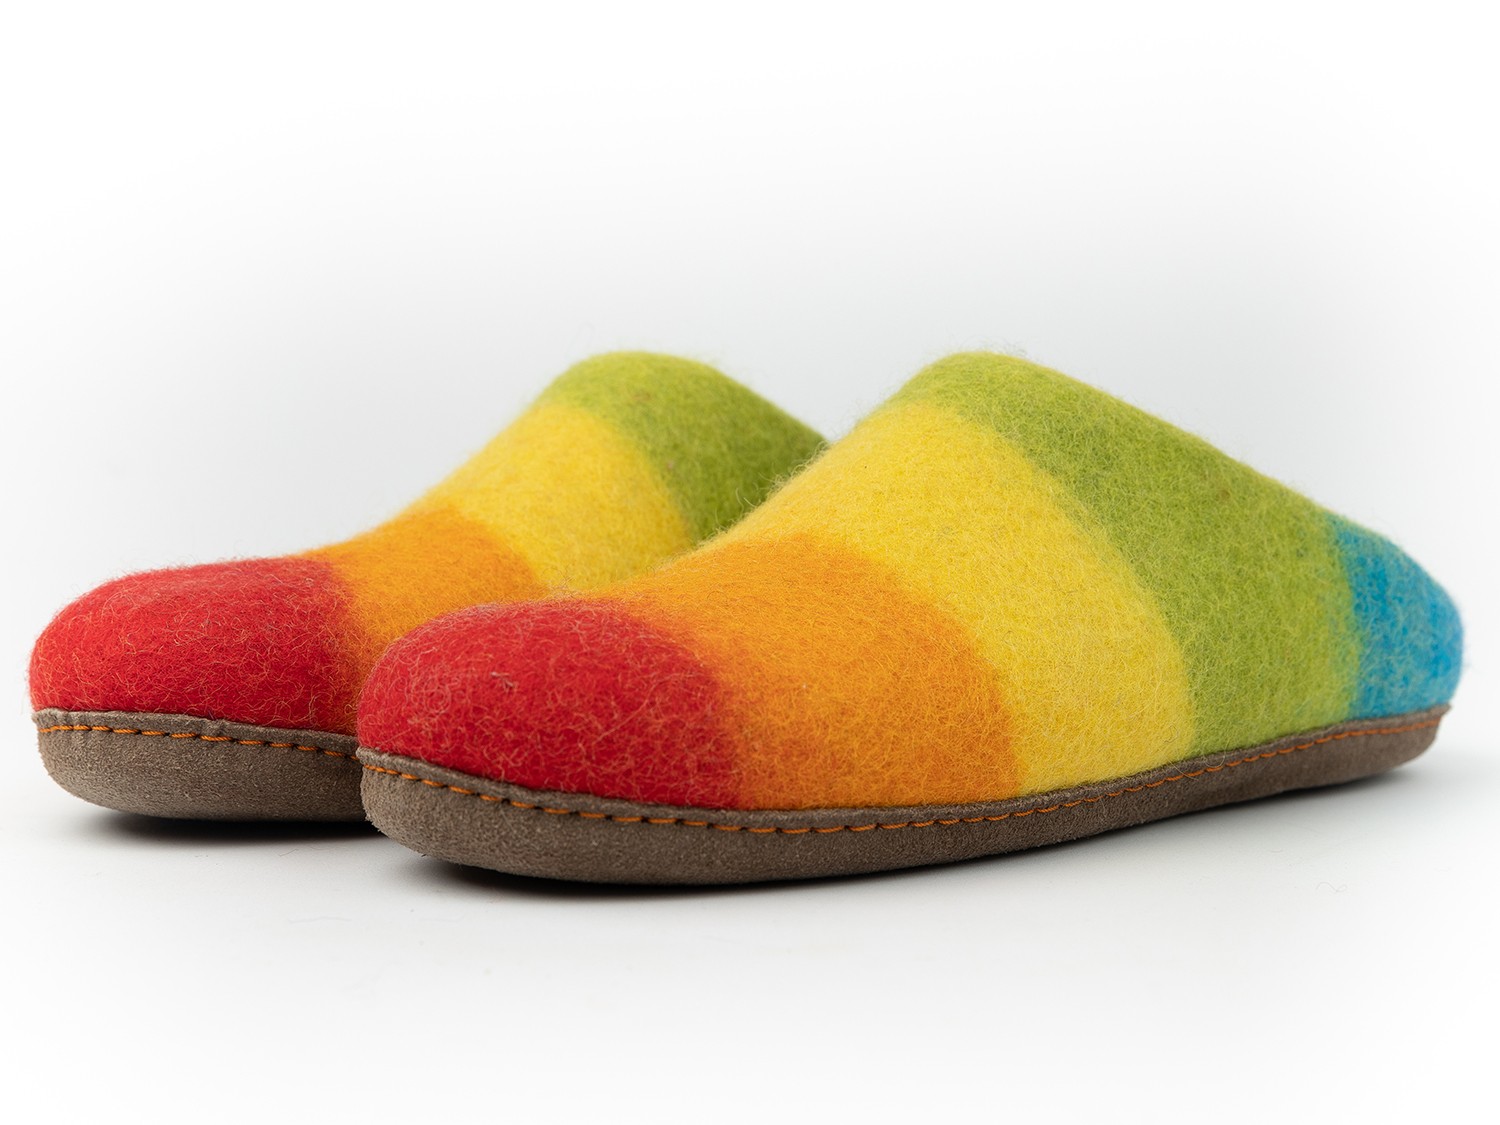 Tak for din hjælp pas Forord Buy Beautiful Rainbow Wool Felt Slippers [Free Shipping] - Felt and Yarn